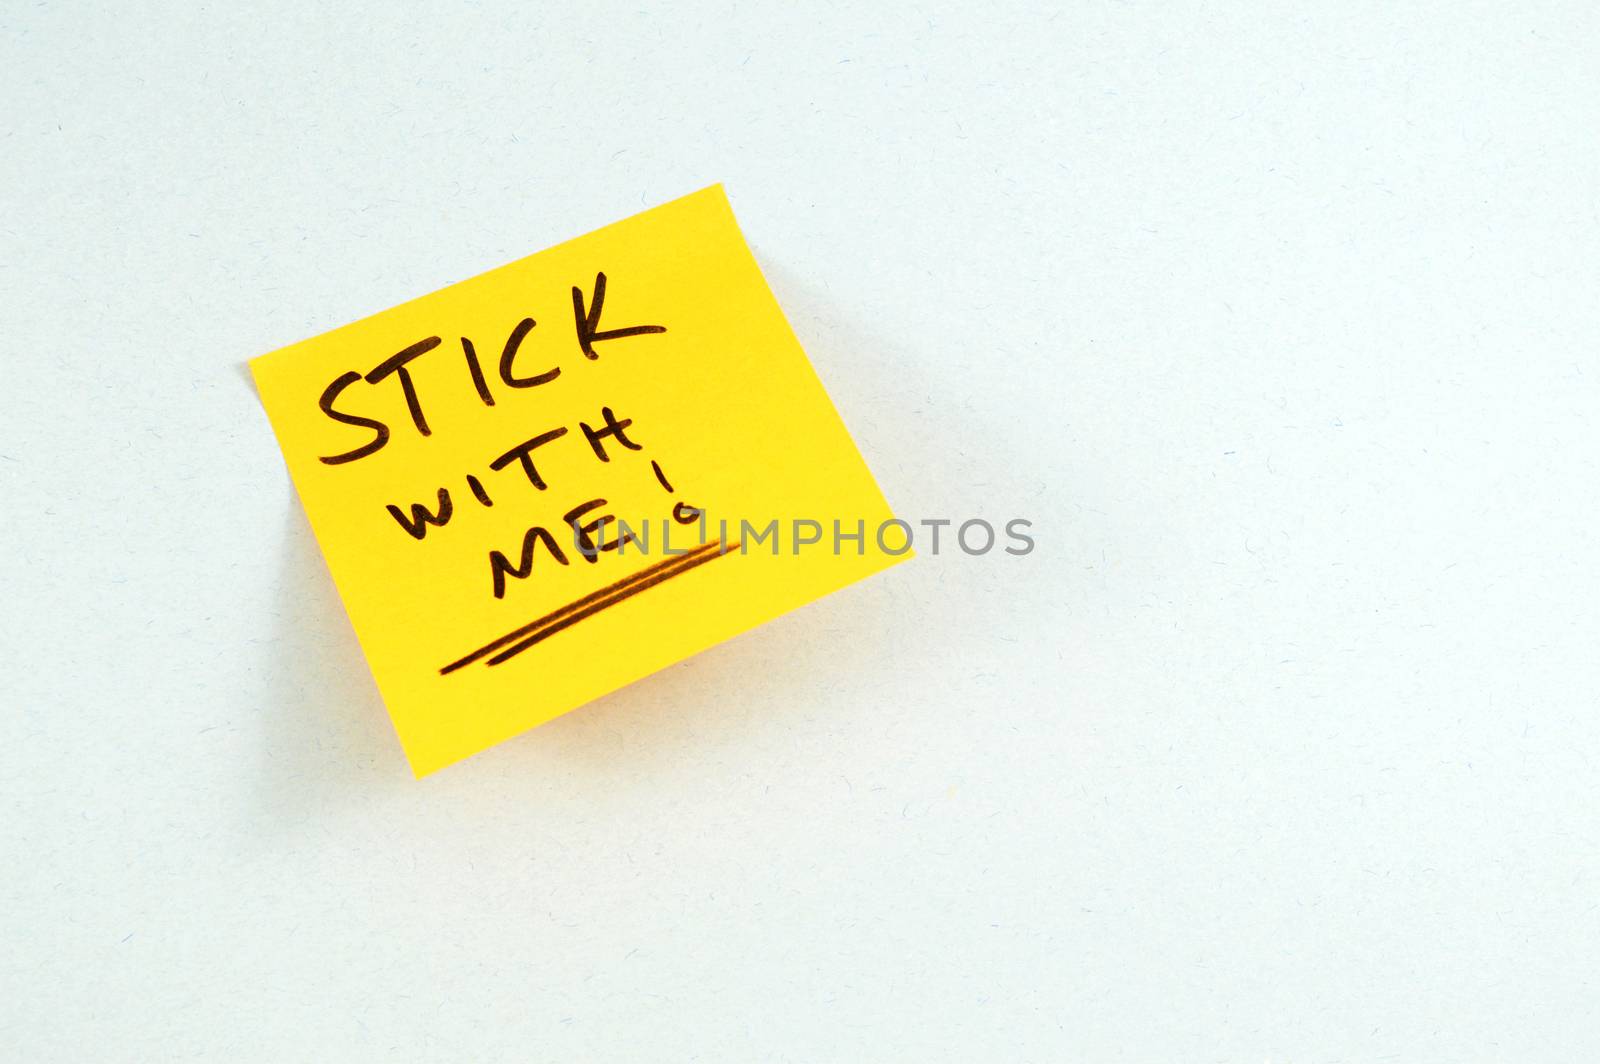 A pun playing with the written words STICK WITH ME on top of a yellow sticky note making the office a little less stressful after reading.